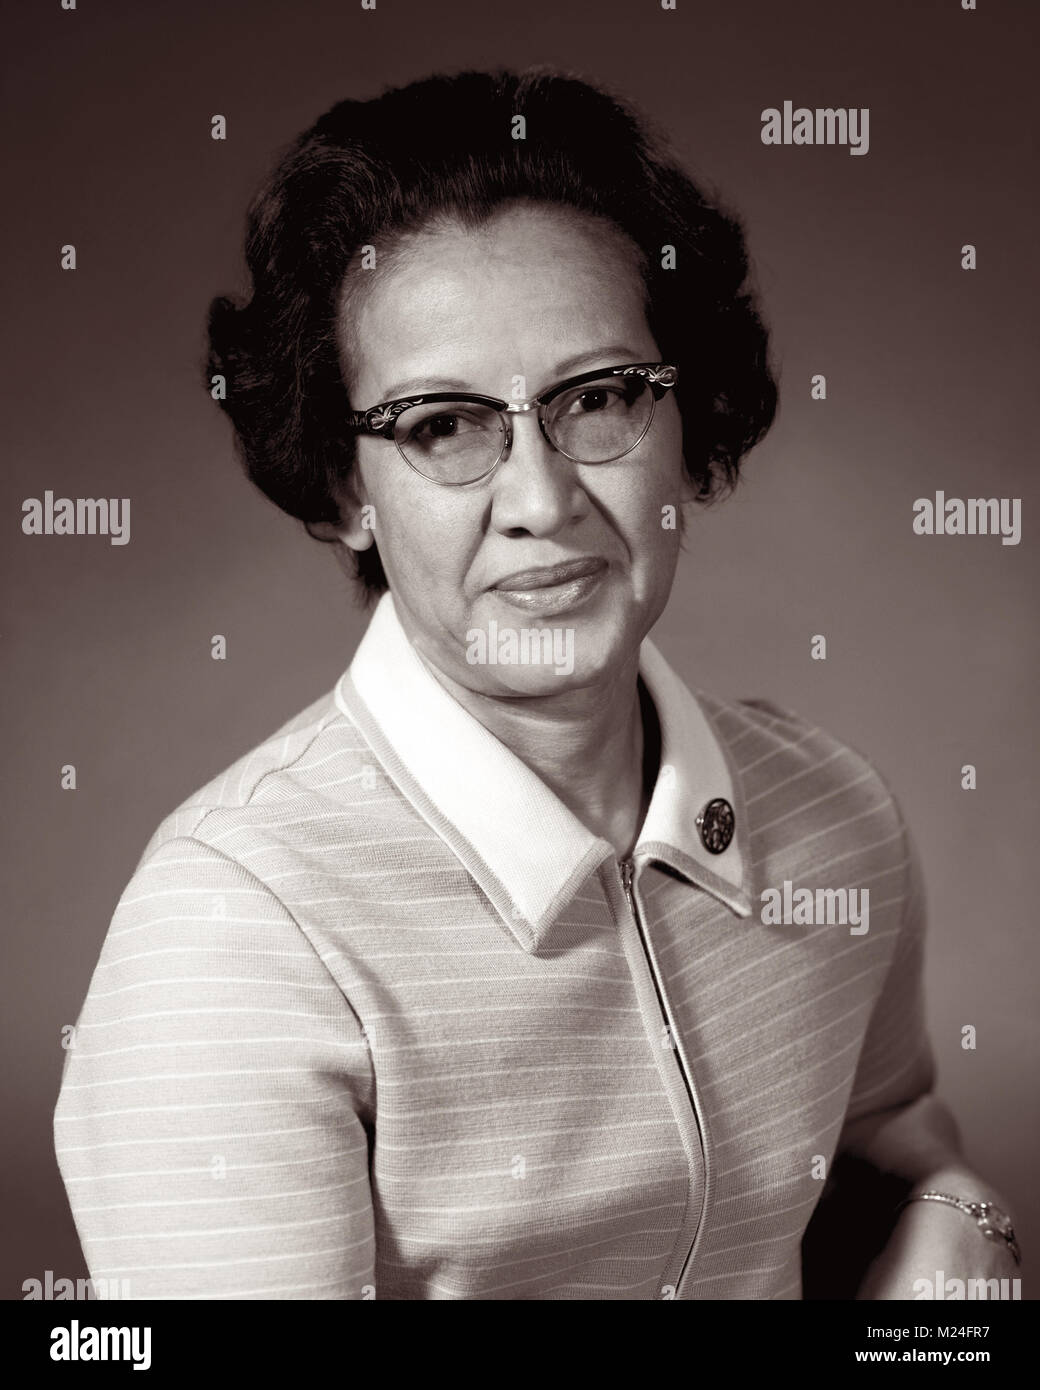 Katherine Johnson, one of NASA's 'human computers' featured in the movie Hidden Figures, is a mathematician and physicist who performed complex calculations that enabled humans to successfully achieve space flight. In 1953 Katherine began working at the National Advisory Committee for Aeronautics’ (NACA’s) Langley laboratory in the all-black West Area Computing section. In her career at NASA (formerly NACA), Johnson worked on the Apollo, Space Shuttle, and Mission to Mars programs. Photo: 1966. Stock Photo